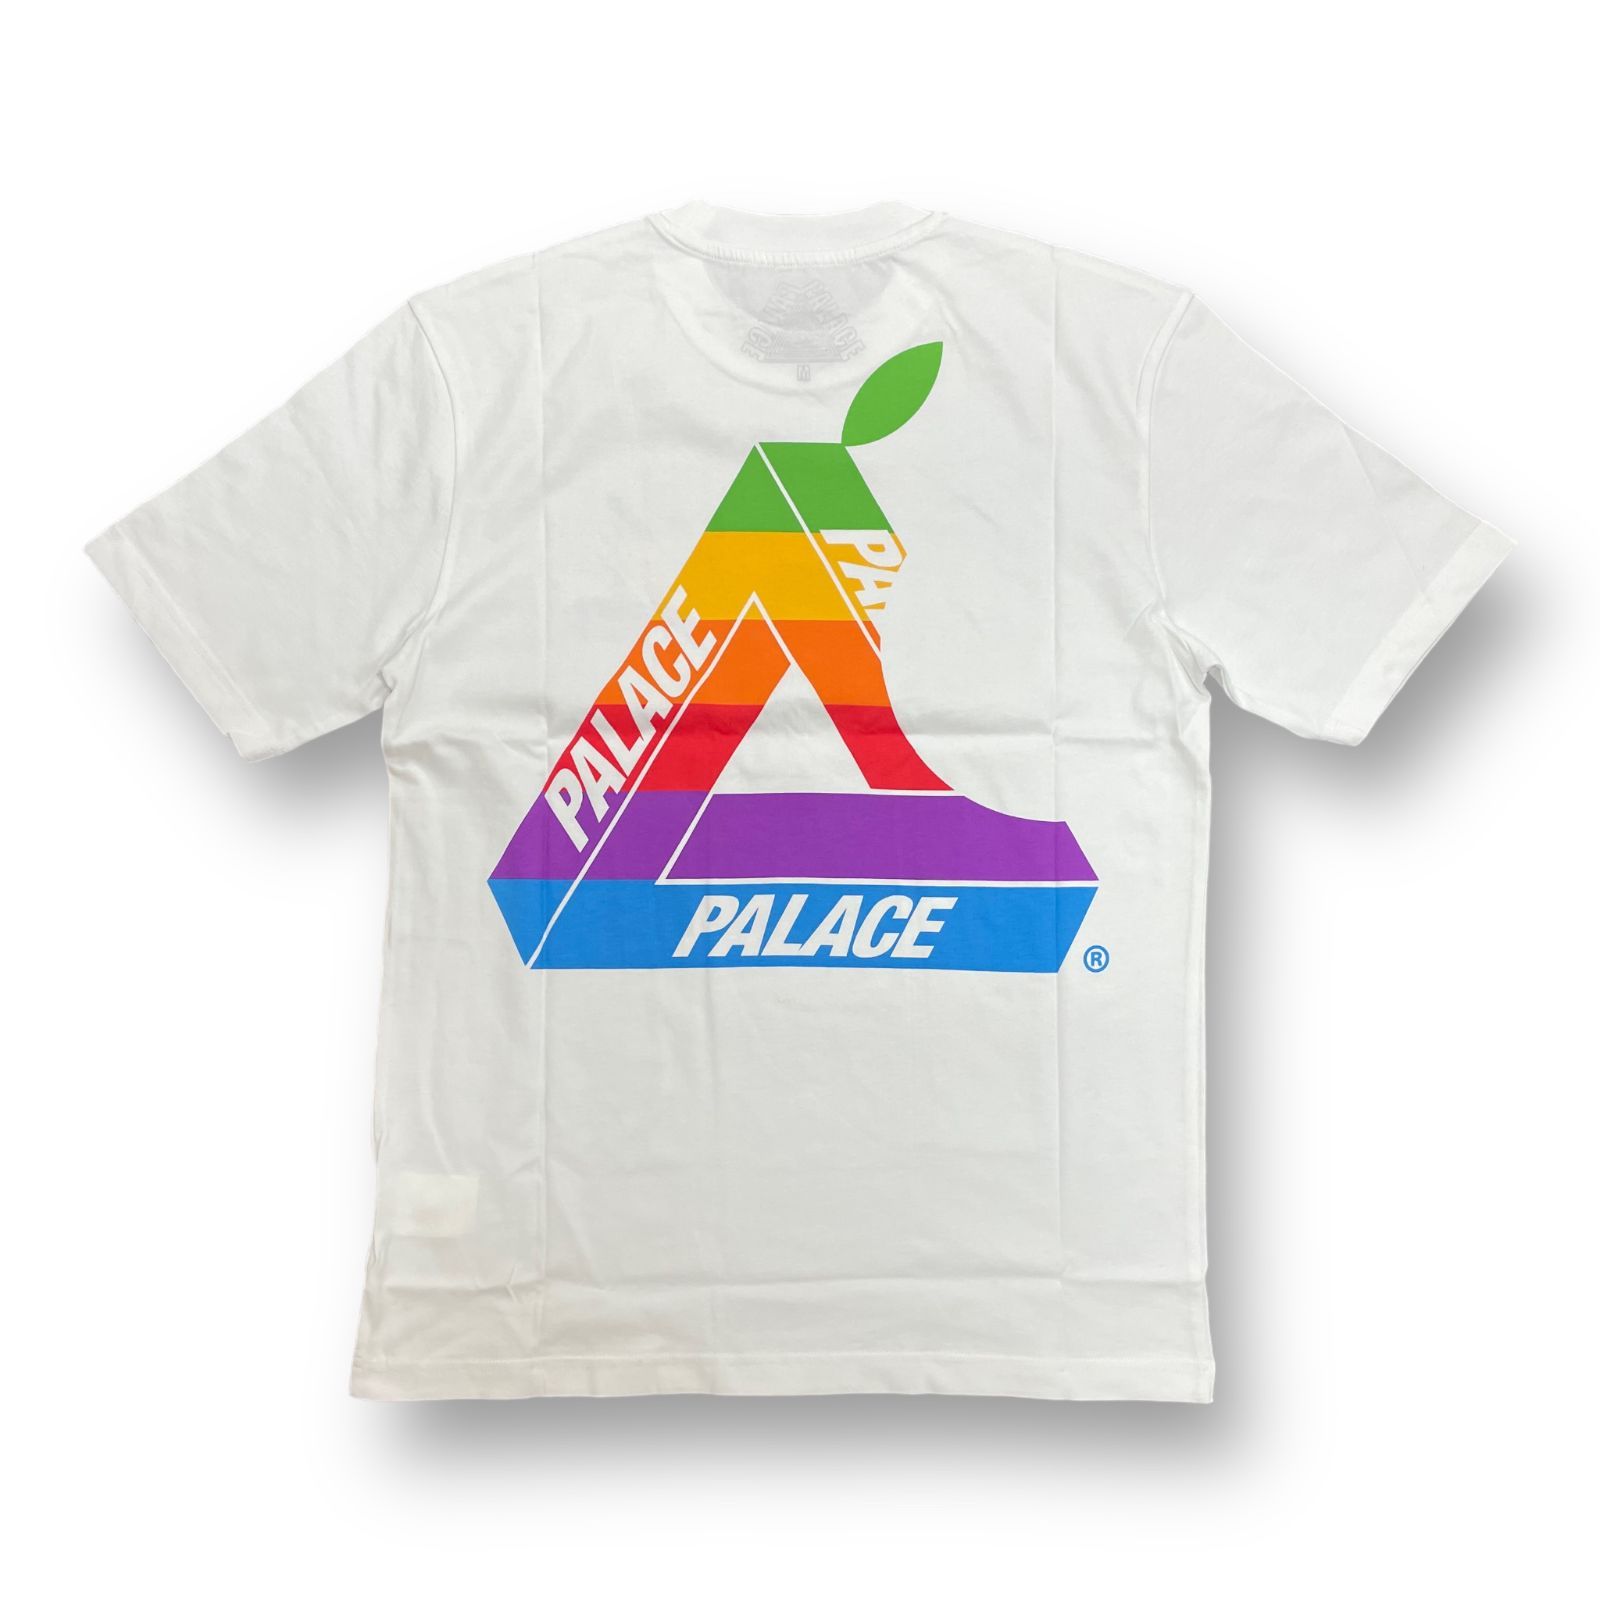 palace skateboards jobsworth t-shirt L - Tシャツ/カットソー(半袖